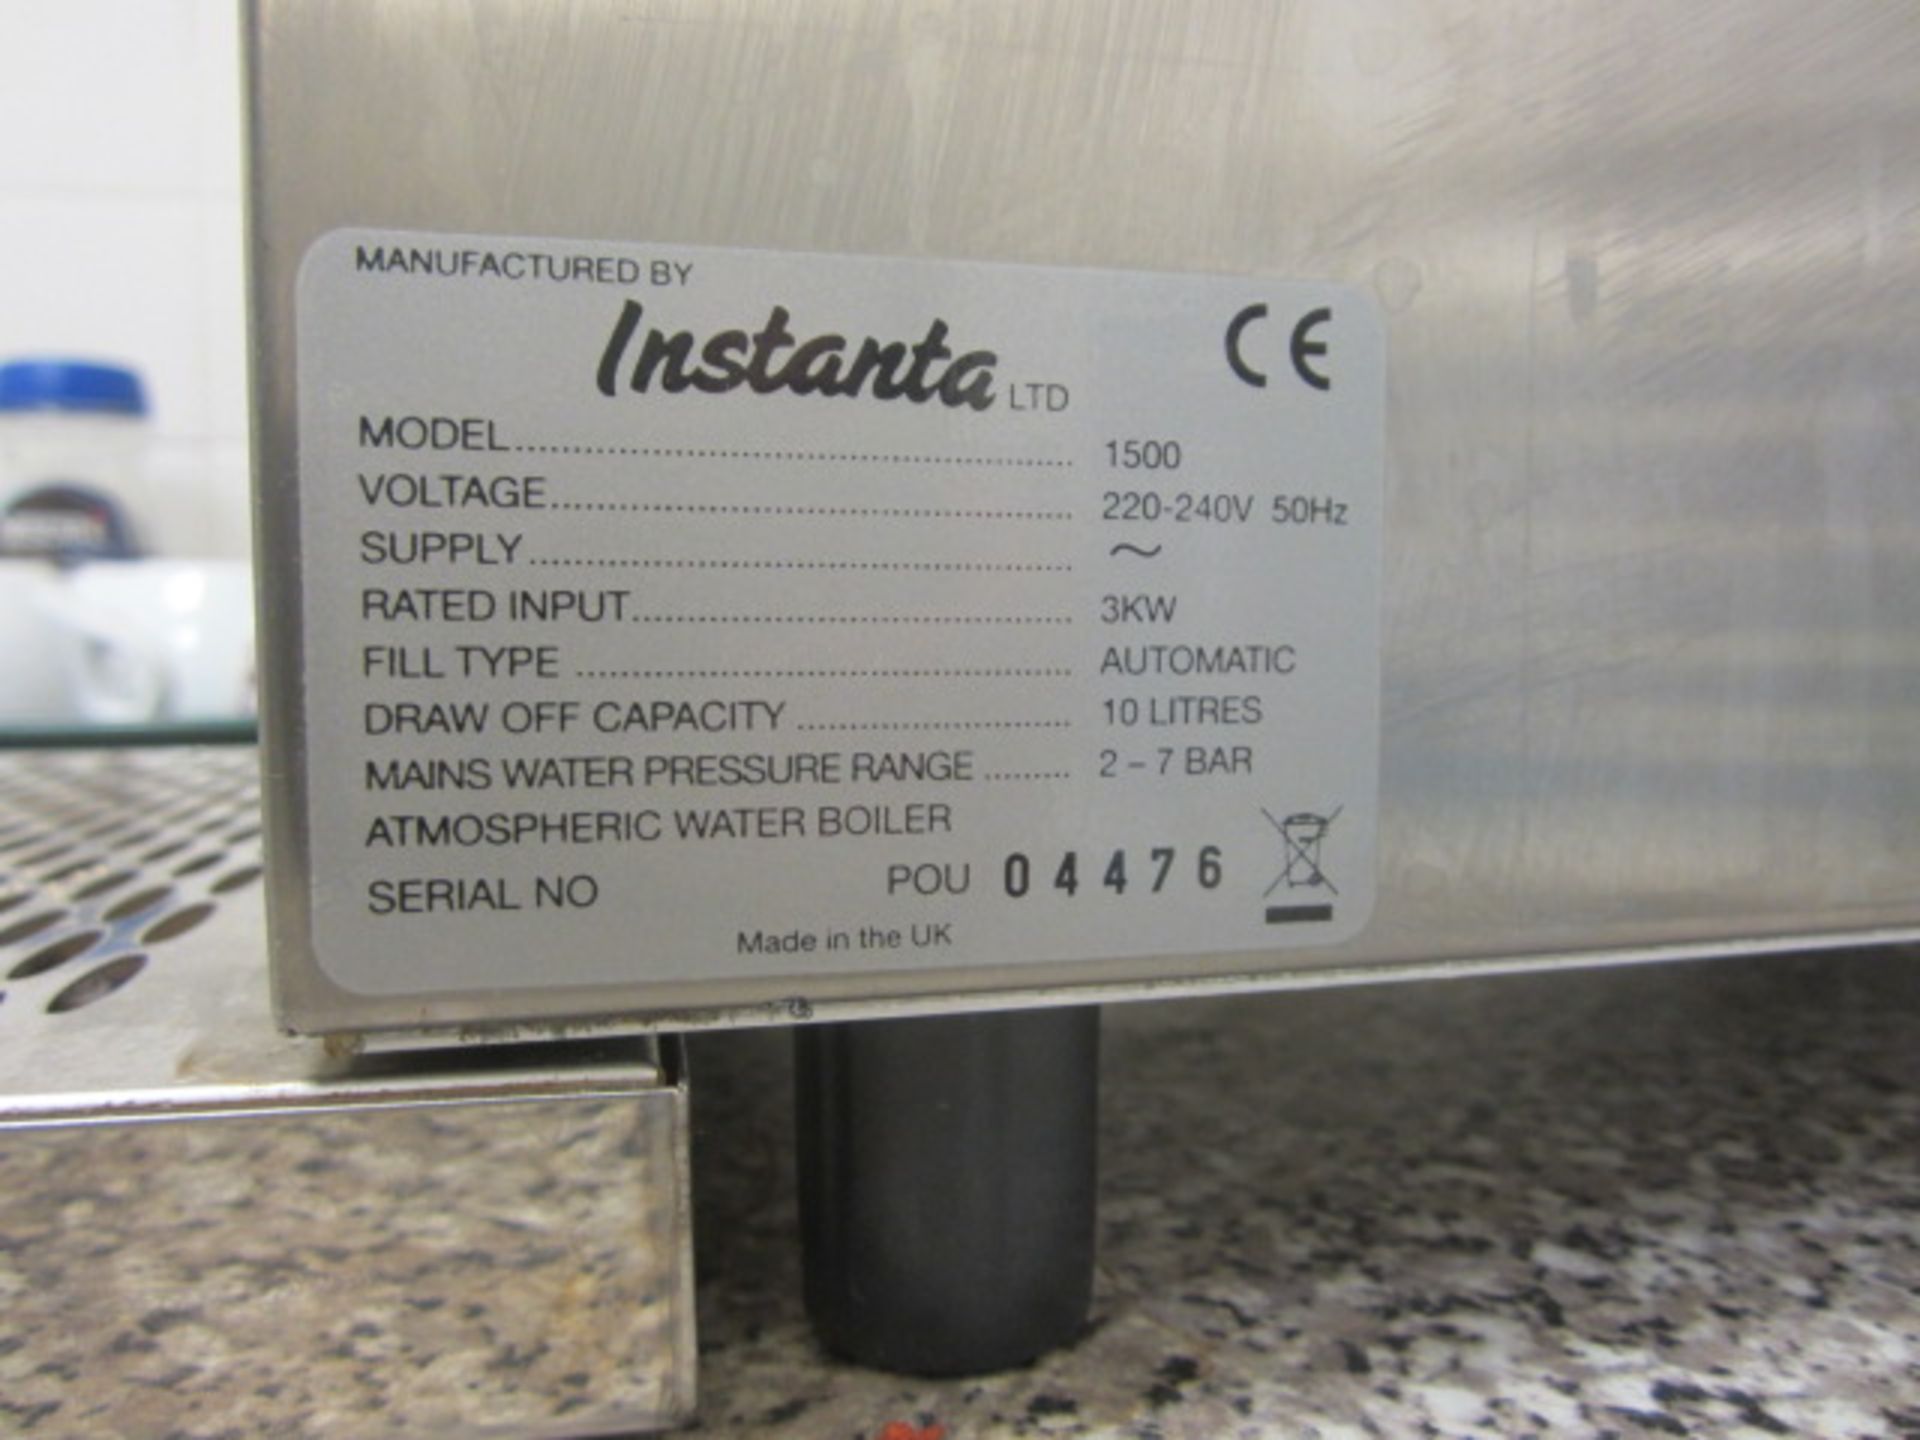 Instanta stainless steel bench top hot water boiler, model 1500, serial no. POU04476 - Disconnection - Image 4 of 4